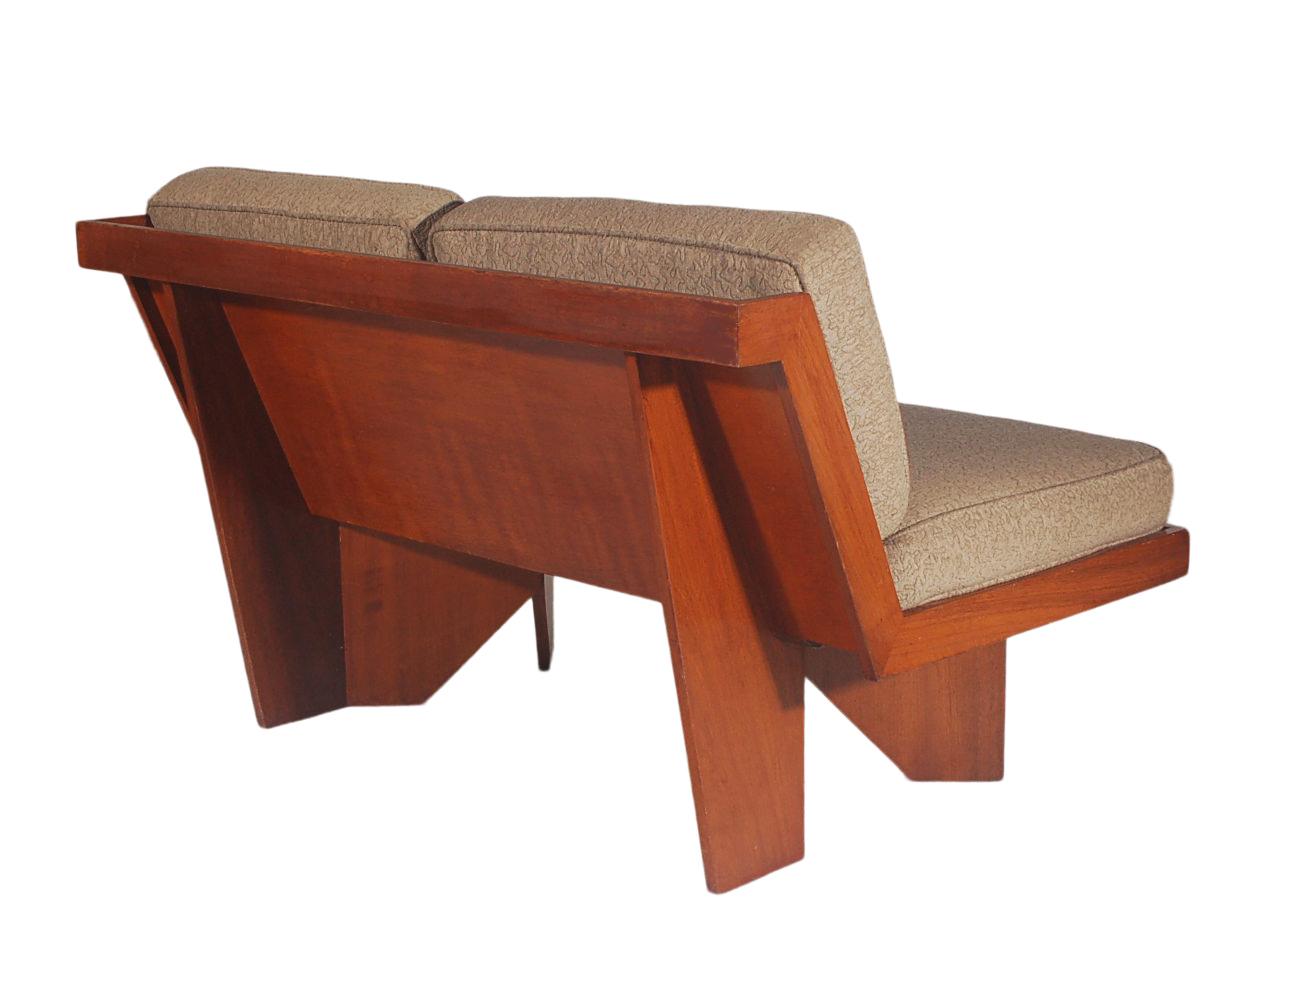 A handsome and well designed loveseat after Frank Lloyd Wright. This is a vintage made piece from the 1940s or 1950s. It features all plywood construction with newer cushions.